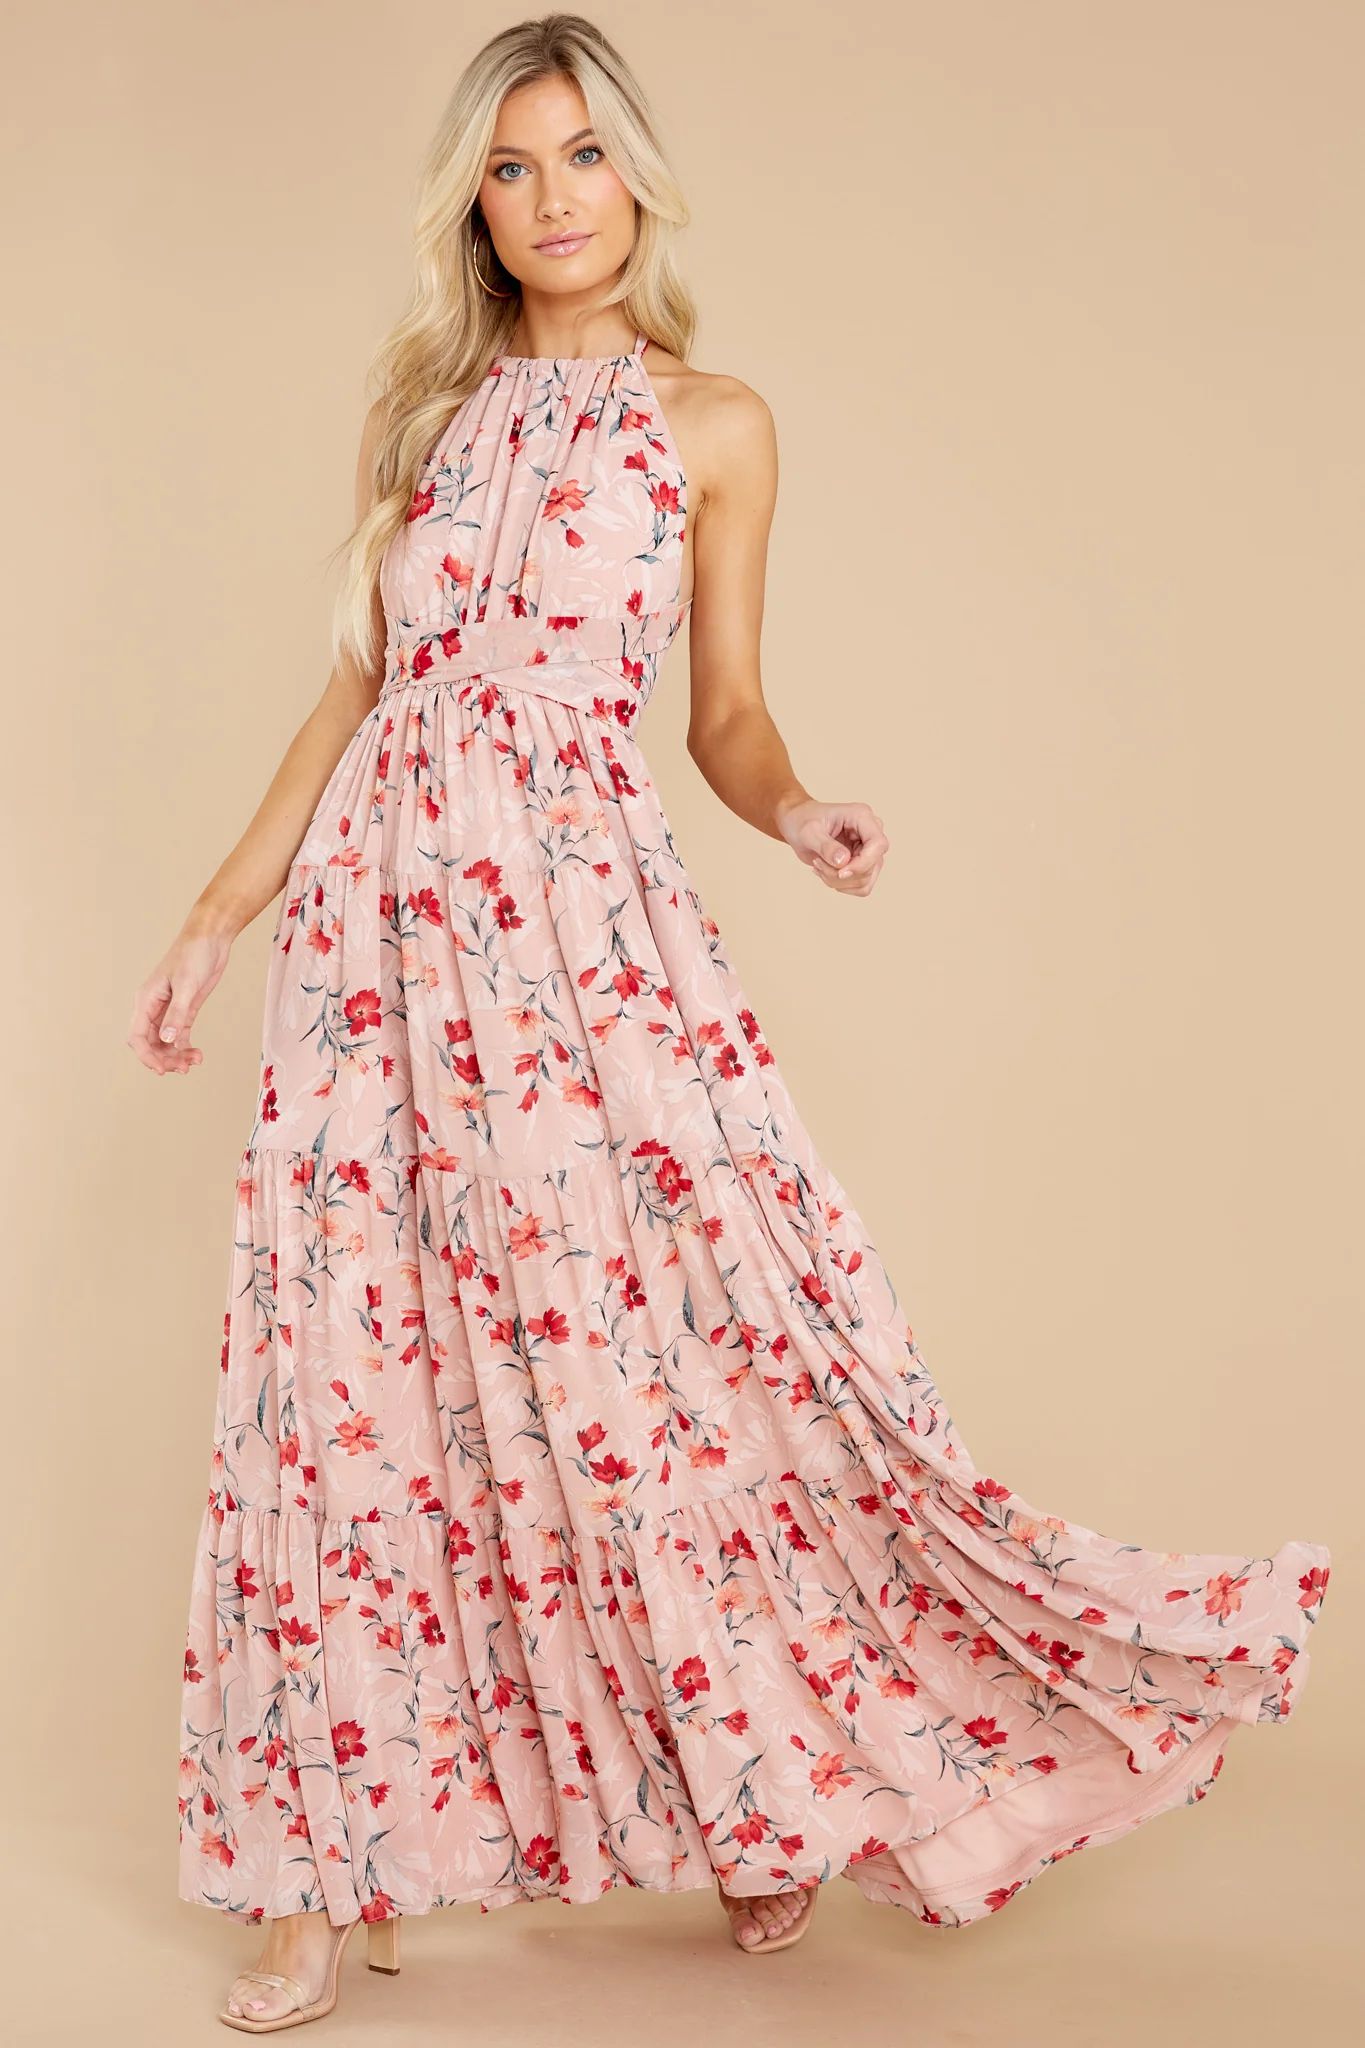 Heat Of The Moment Blush Floral Print Maxi Dress | Red Dress 